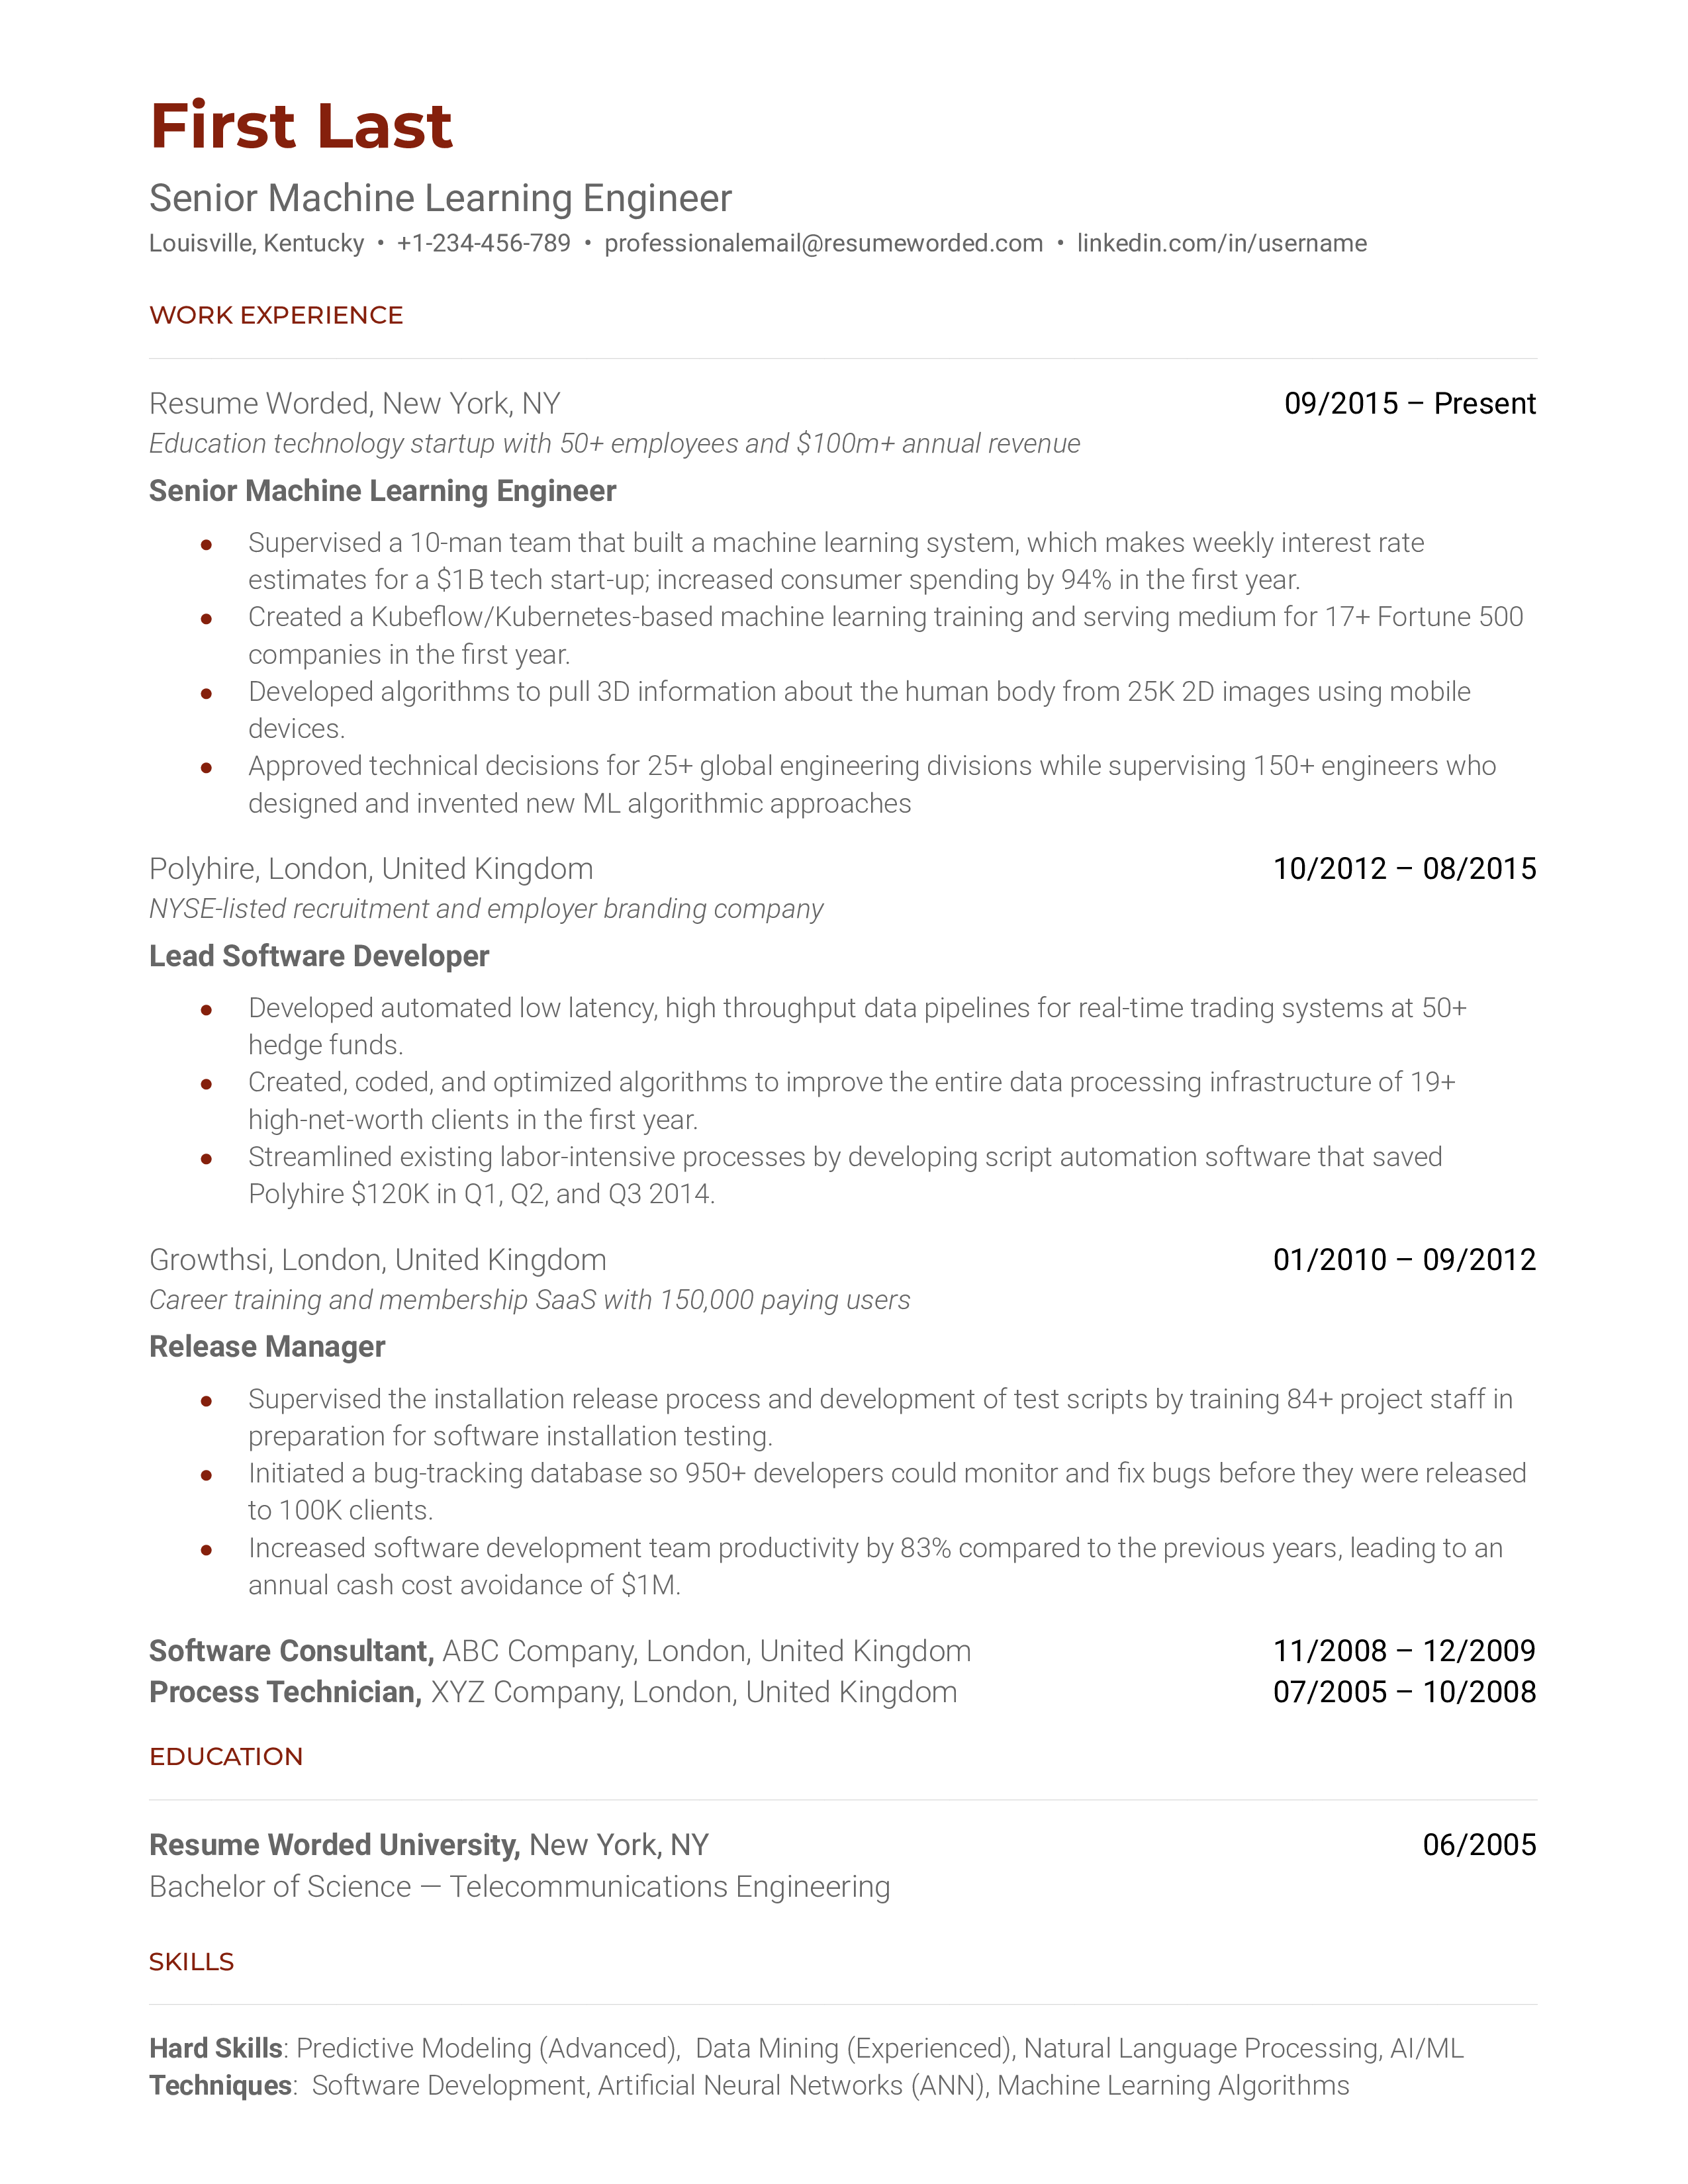 A clear and concise CV for a Senior Machine Learning Engineer role.